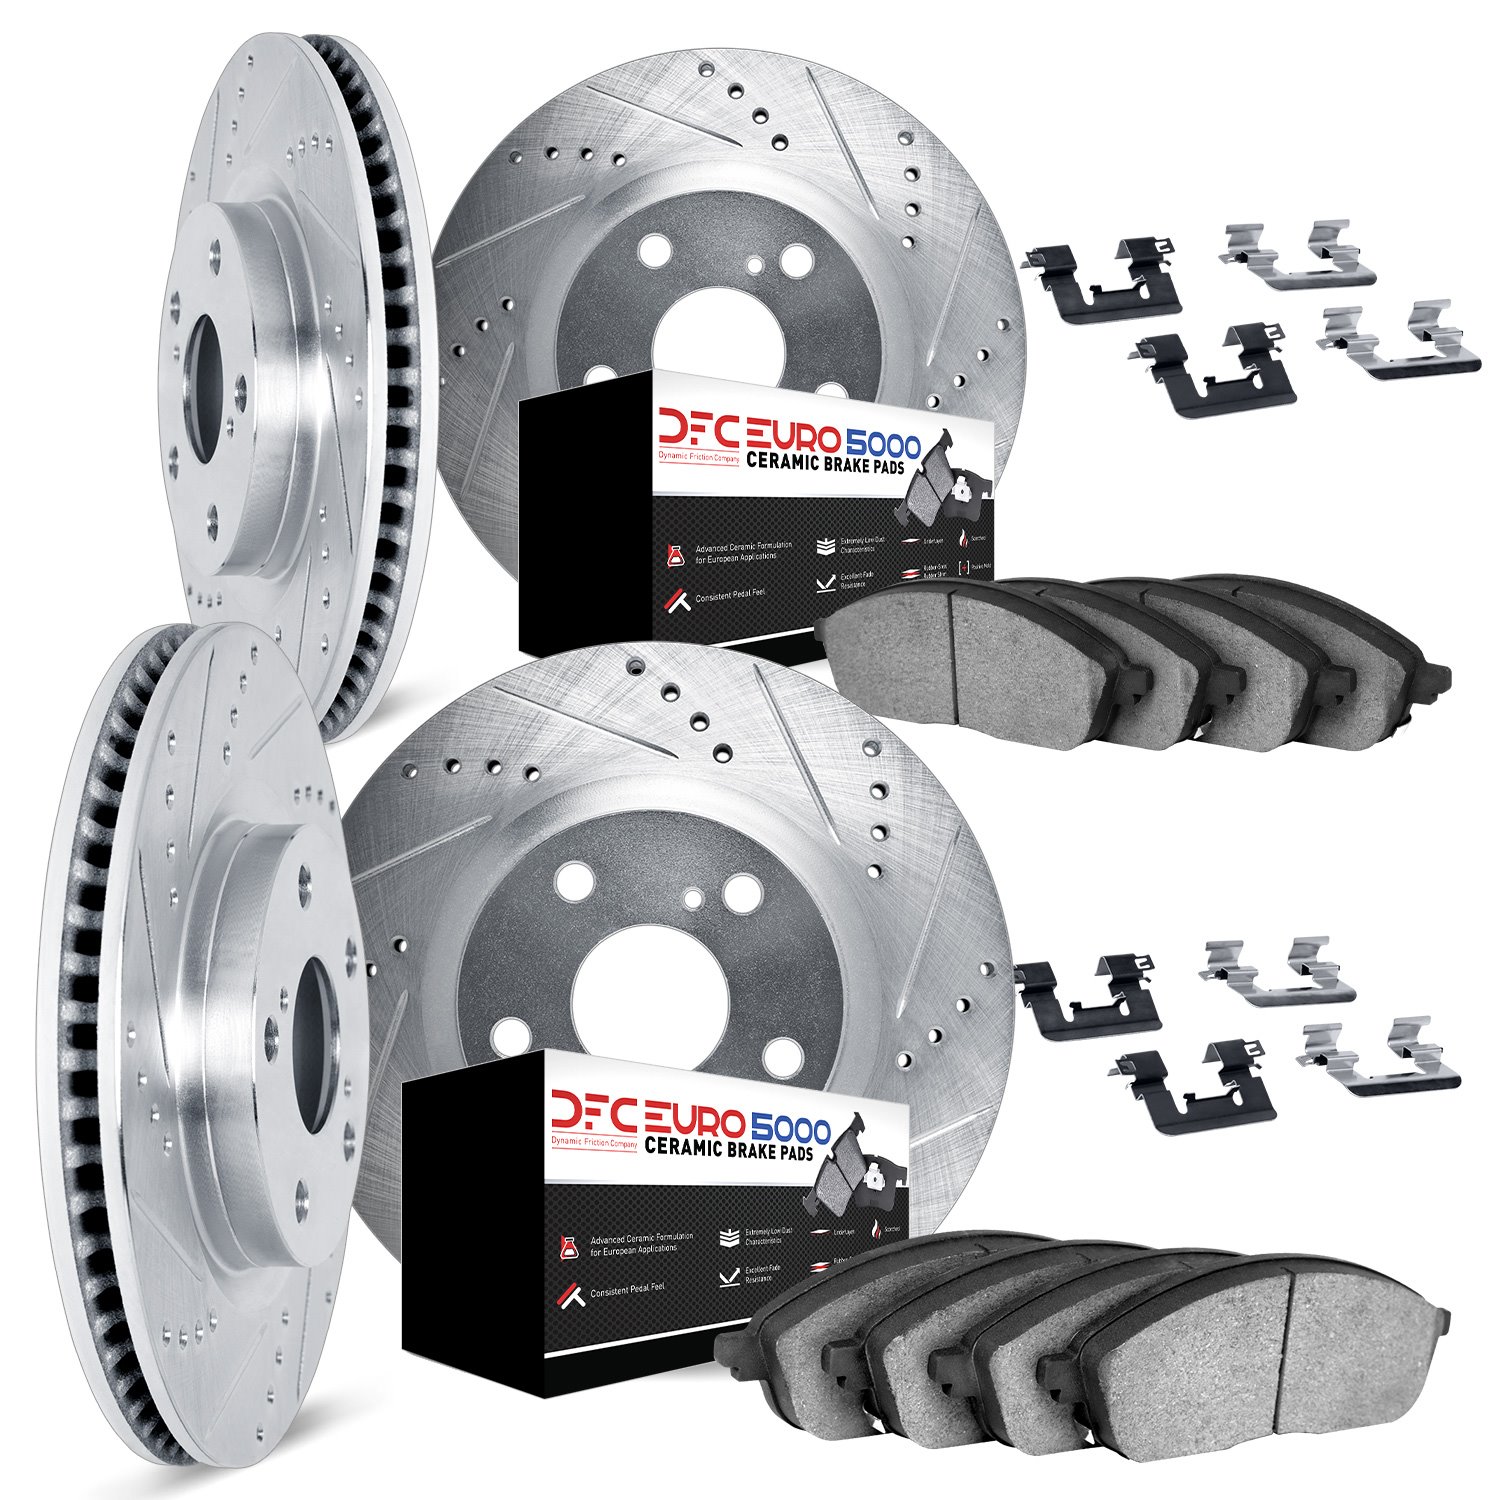 7614-31027 Drilled/Slotted Brake Rotors w/5000 Euro Ceramic Brake Pads Kit & Hardware [Silver], 2013-2020 BMW, Position: Front a